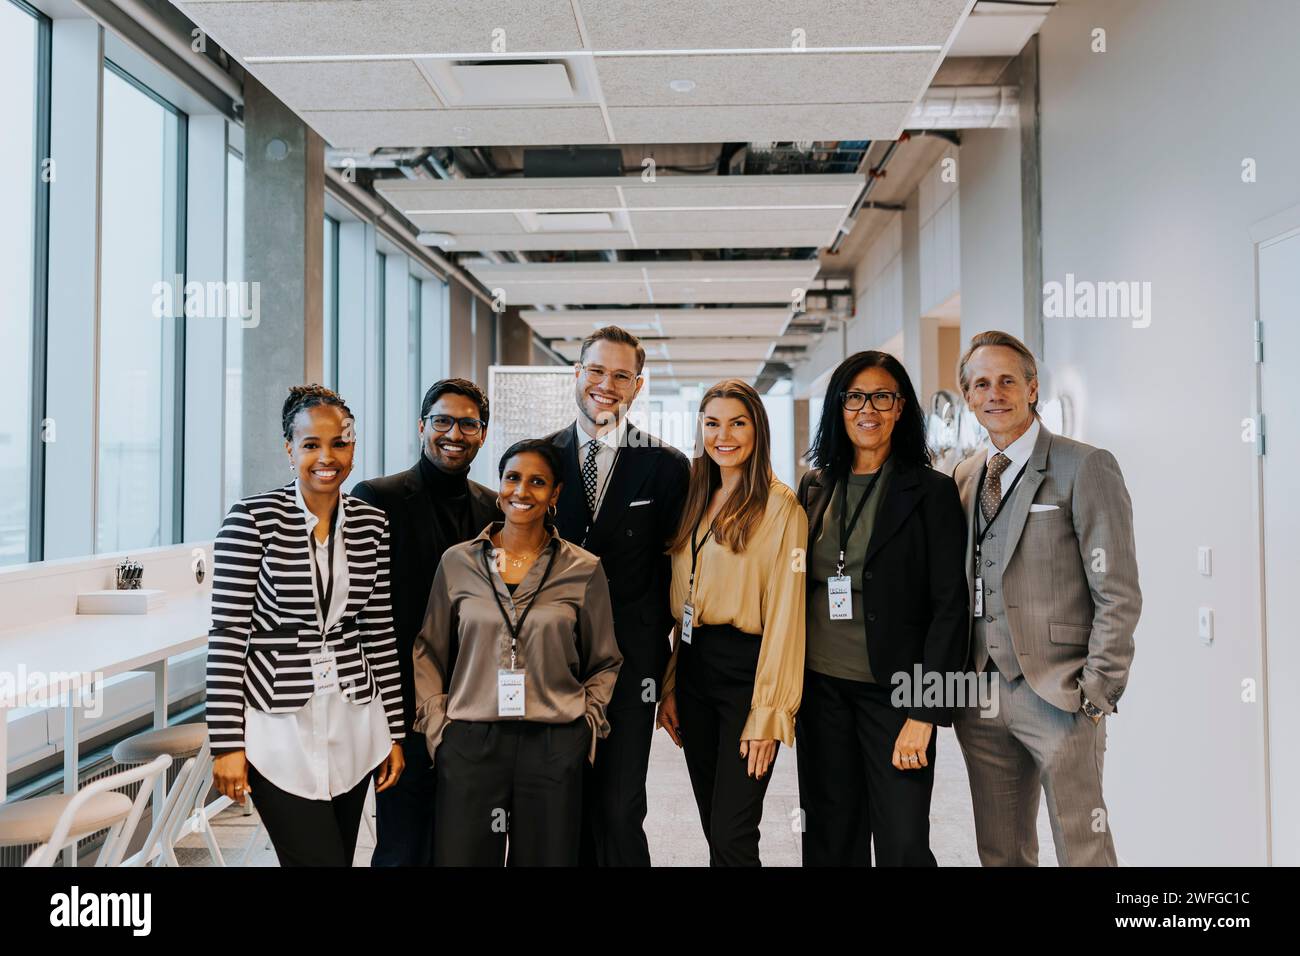 Portrait of smiling multiracial colleagues standing in corridor Stock Photo